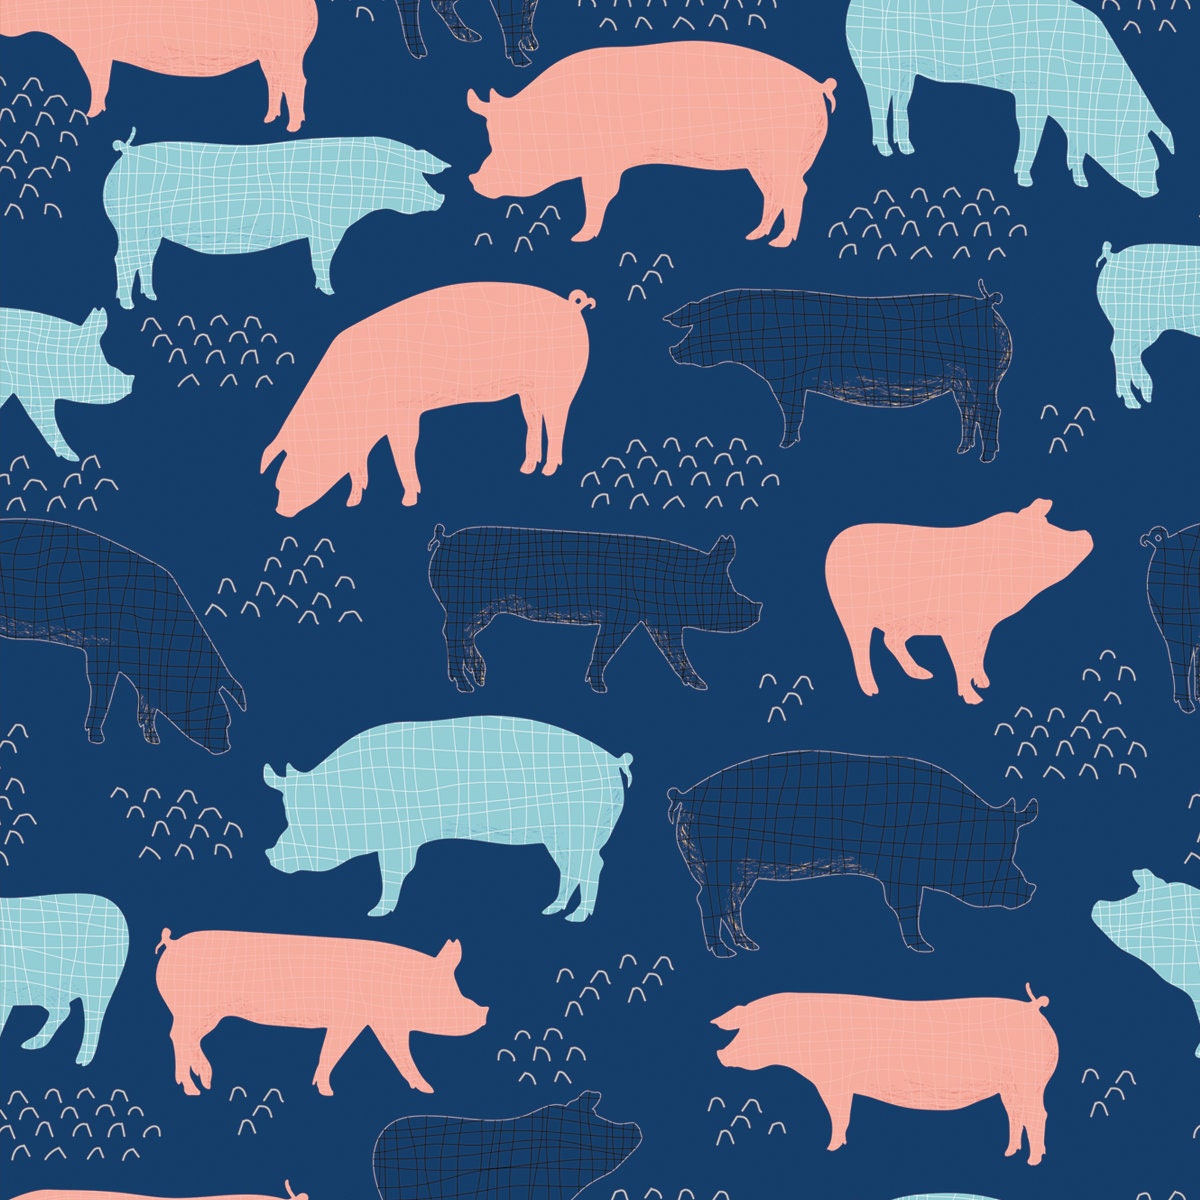 Pigs Vector Seamless Pattern Isolated Hand Drawn Illustration Wallpaper Kitchen Mural